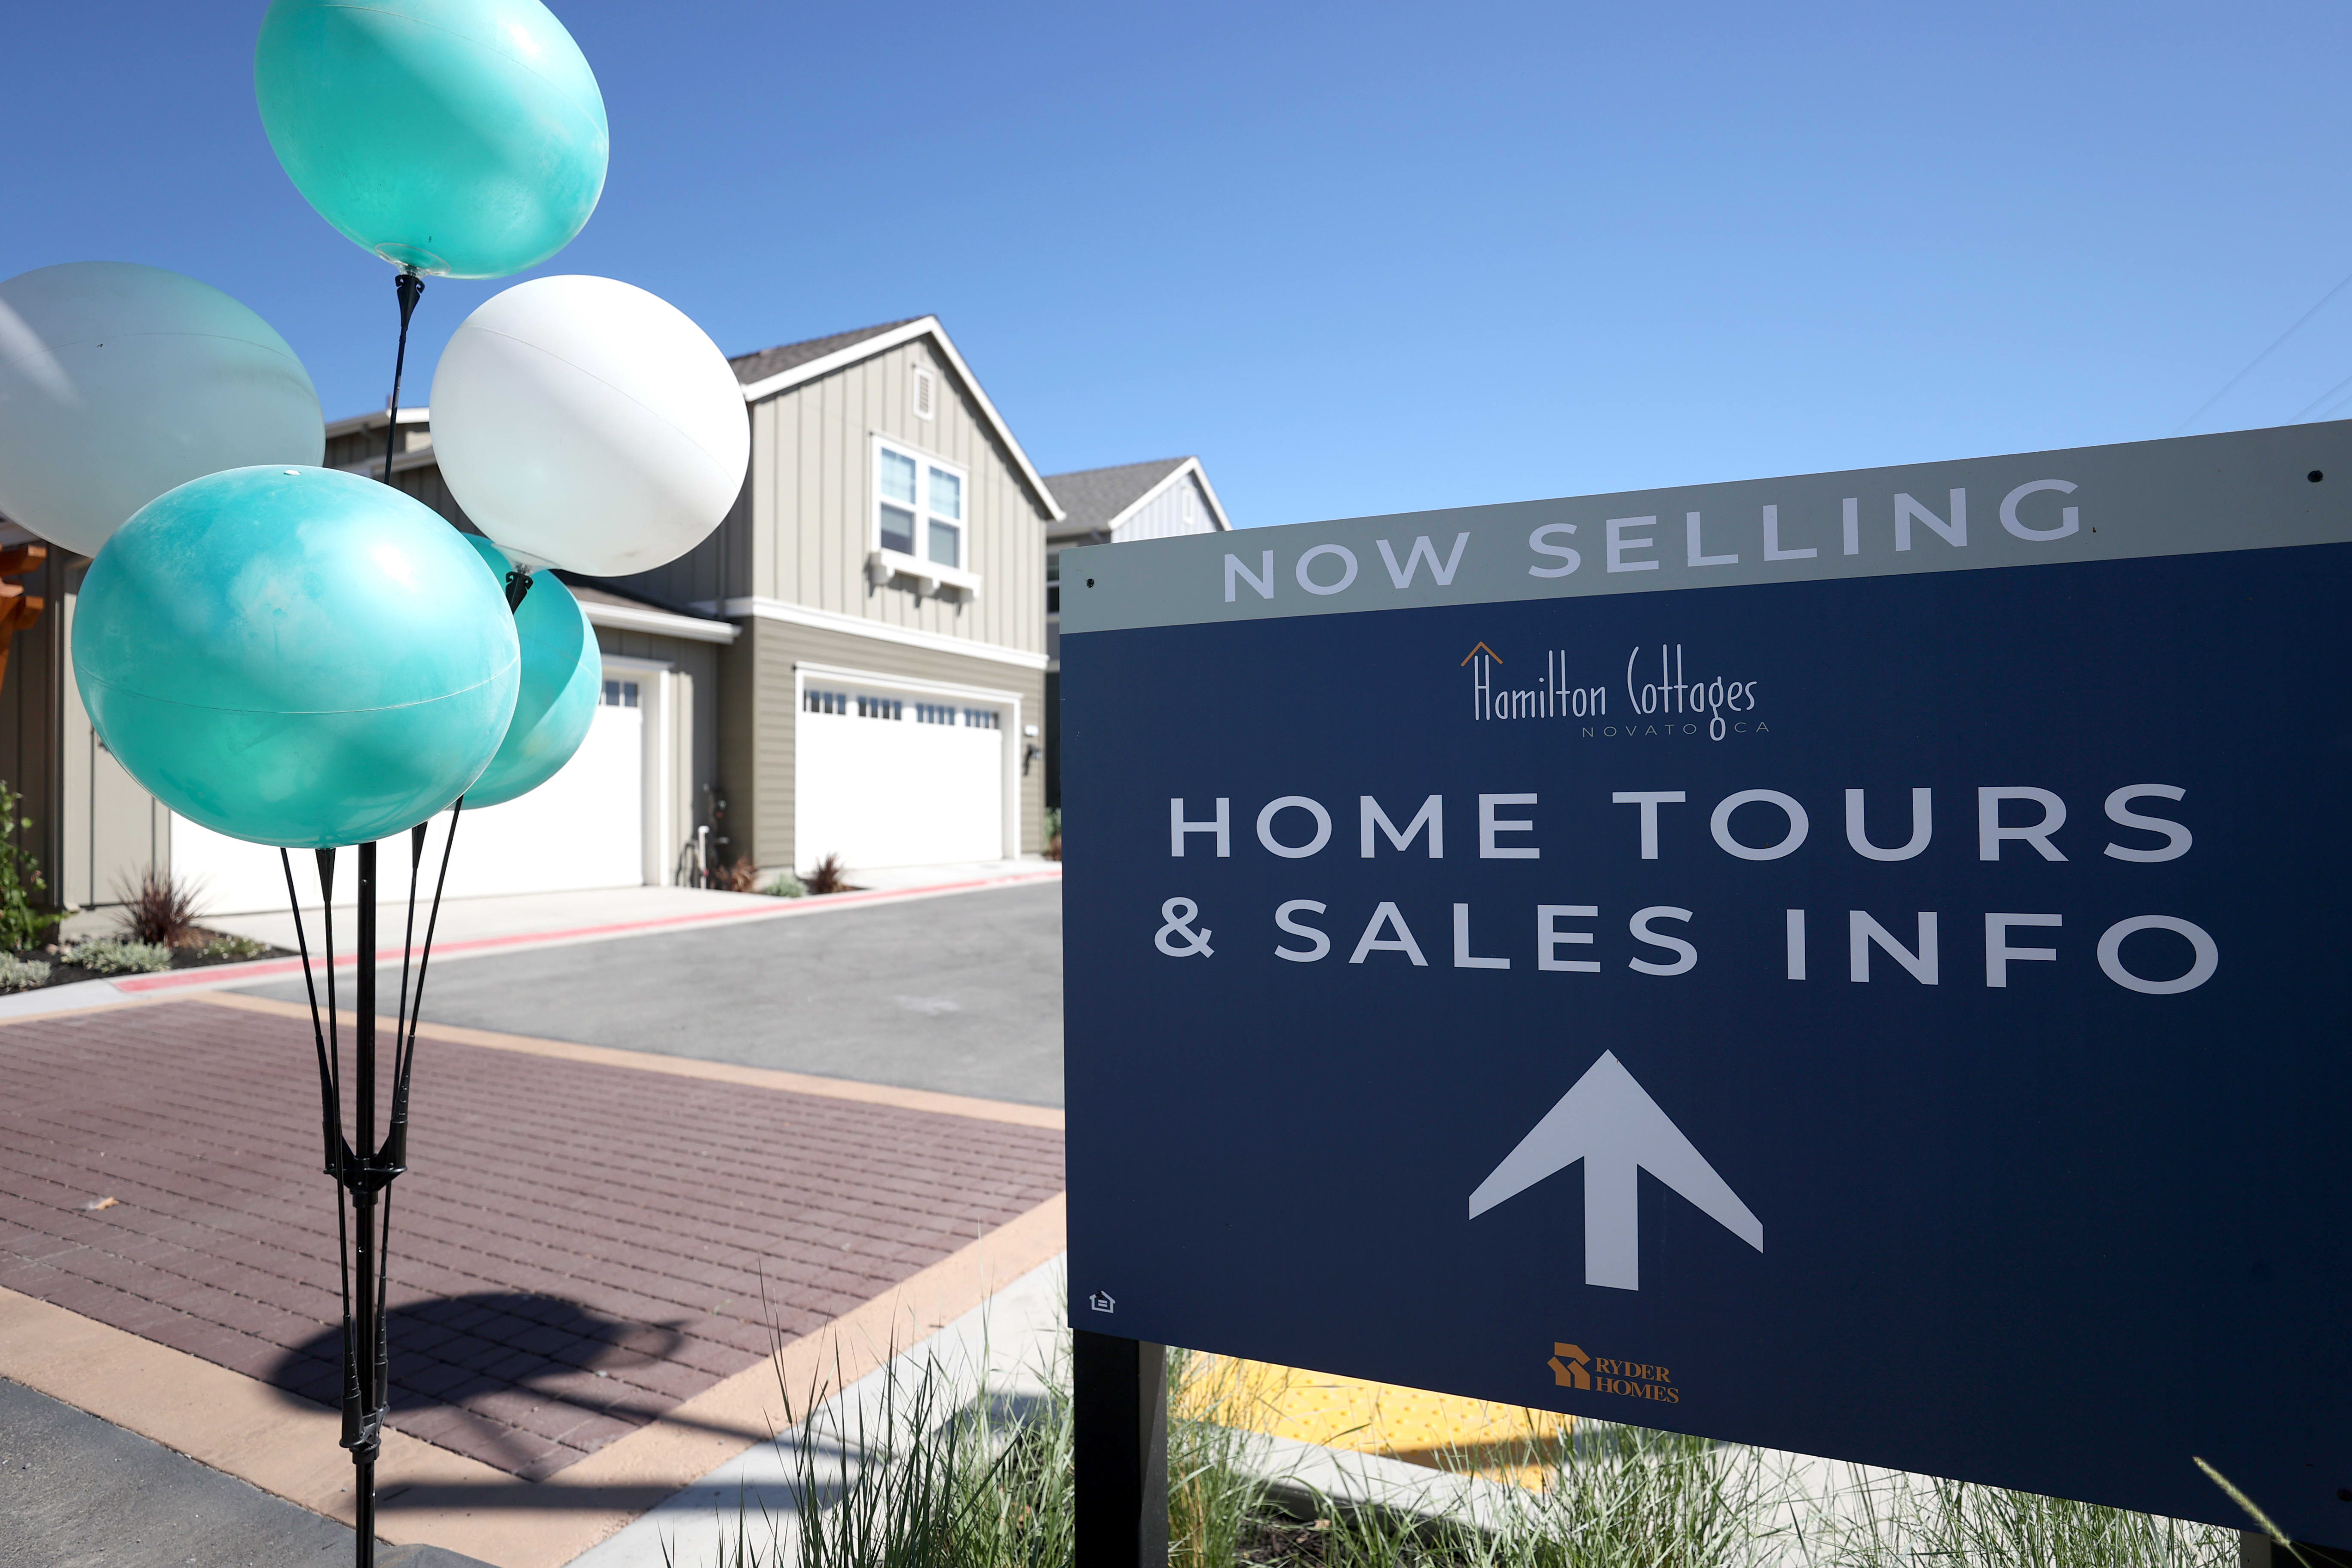 Home prices in August hinted at possible cooling in the market, S&amp;P Case-Shi..